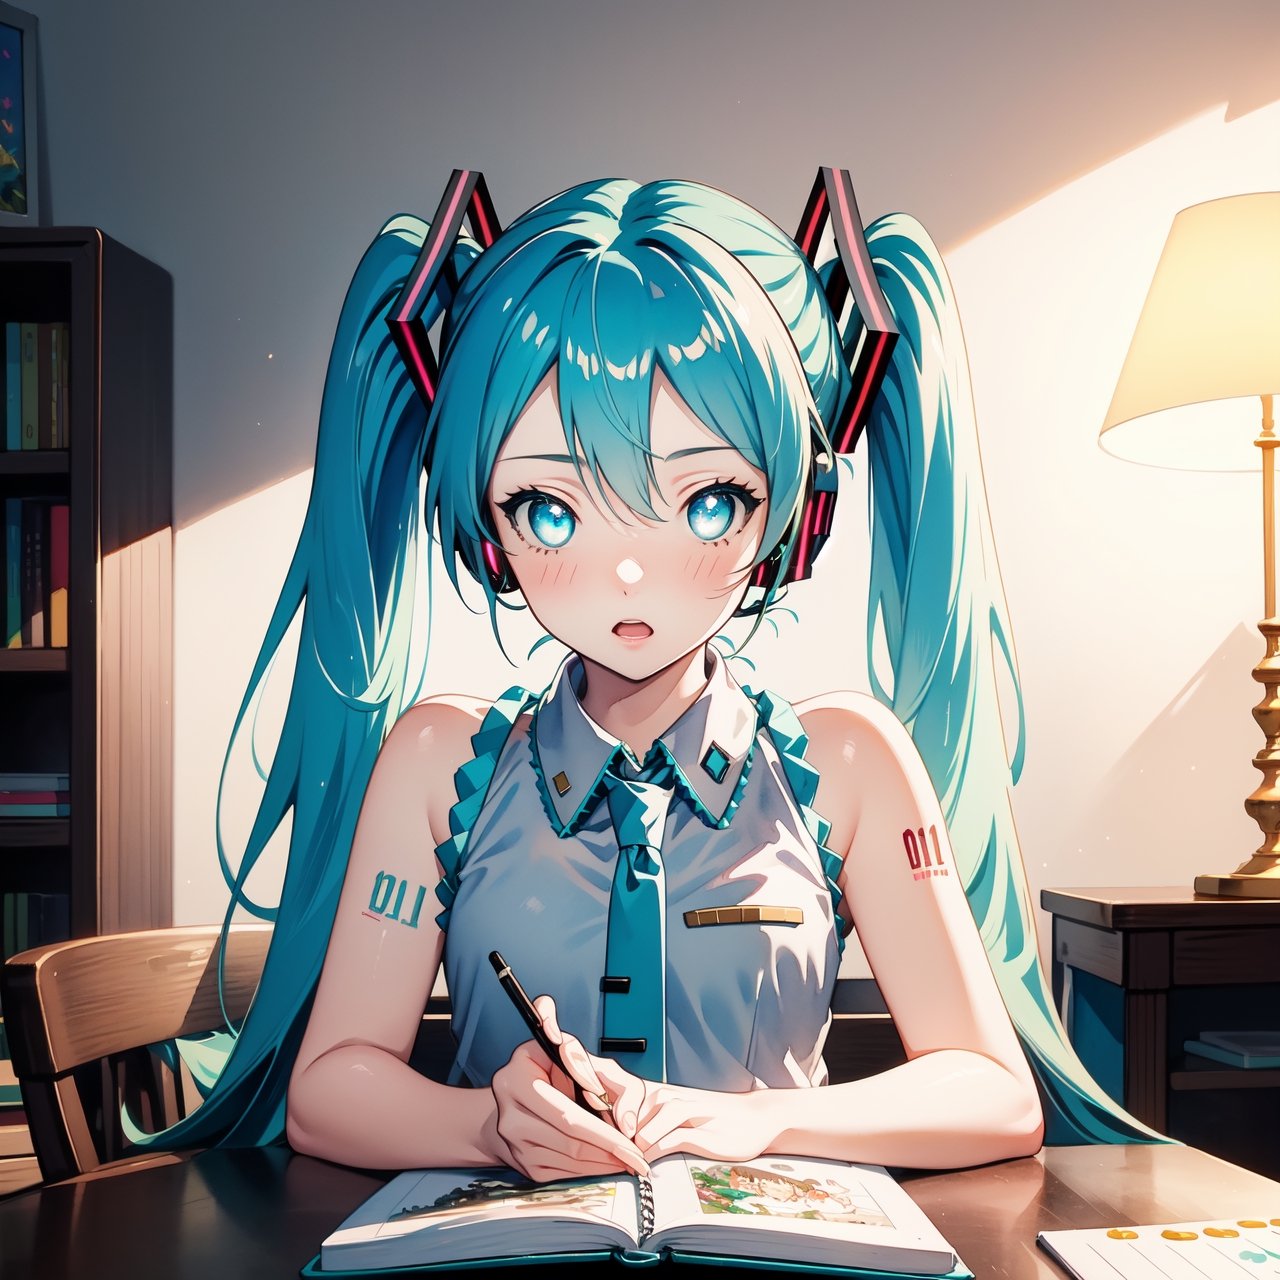 (Artwork), (masterpiece), (incredible illustration), (Pixiv anime), (watercolor), (best quality), (extremely detailed 8k CG wallpaper), (eye, face, expression details), a cute girl, long blue hair, intense bright green eyes, hair styled in pigtails, background of a teenager's room with various items, a desk with a notebook, a lamp, indirect linear lighting. ,mikudef,(Hatsune Miku, glowing eyes)